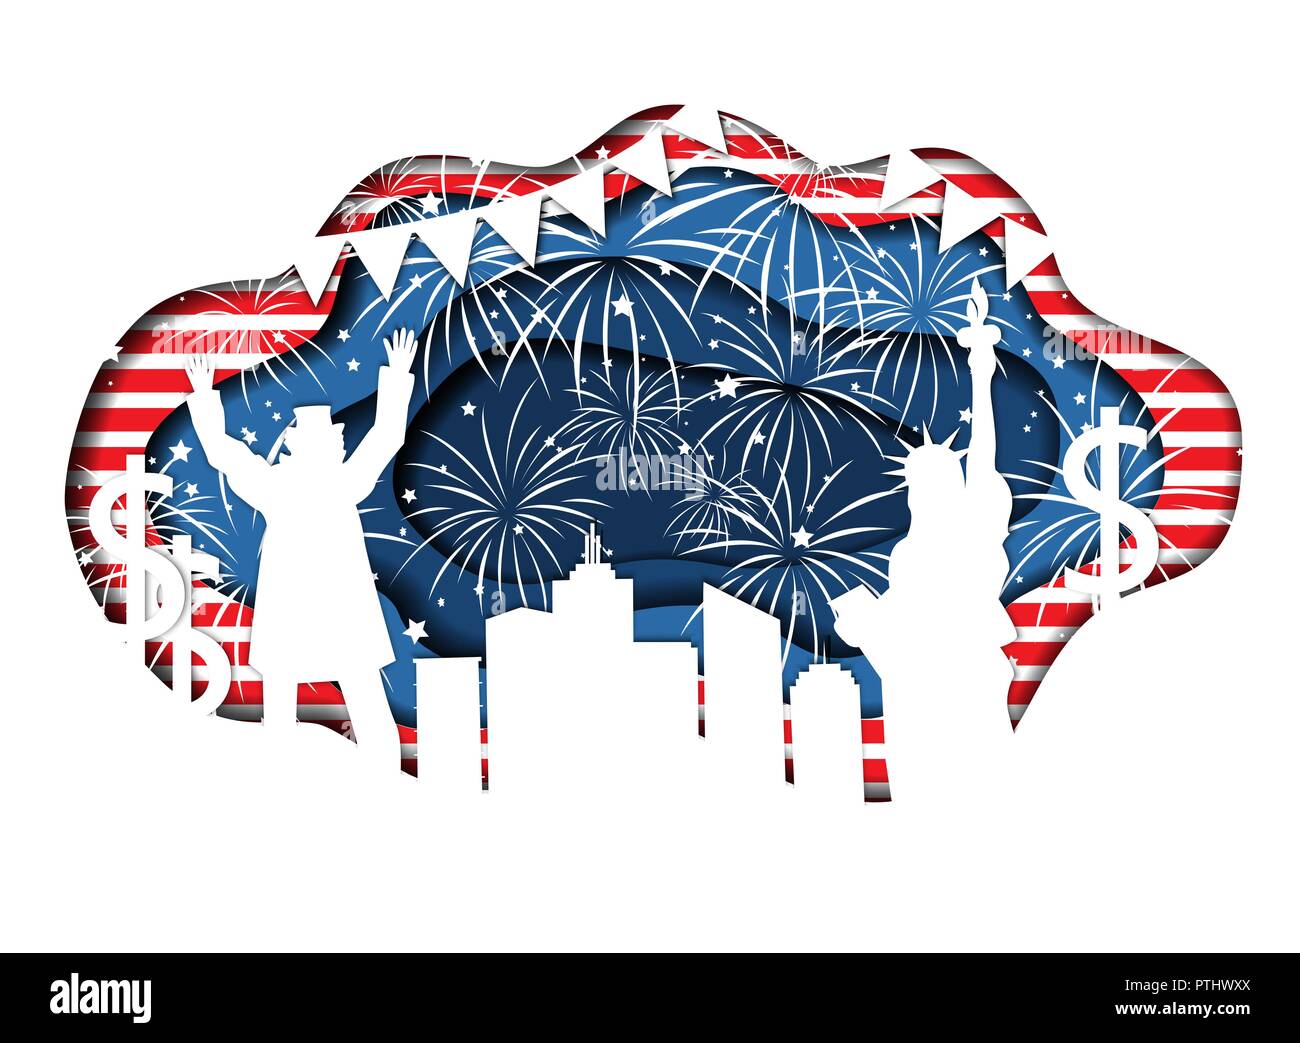 Stylish paper cut banner for Independence Day July 4 USA with Statue of Liberty, Uncle Sam, lights, stars, and city silhouette. Vector illustration. N Stock Vector